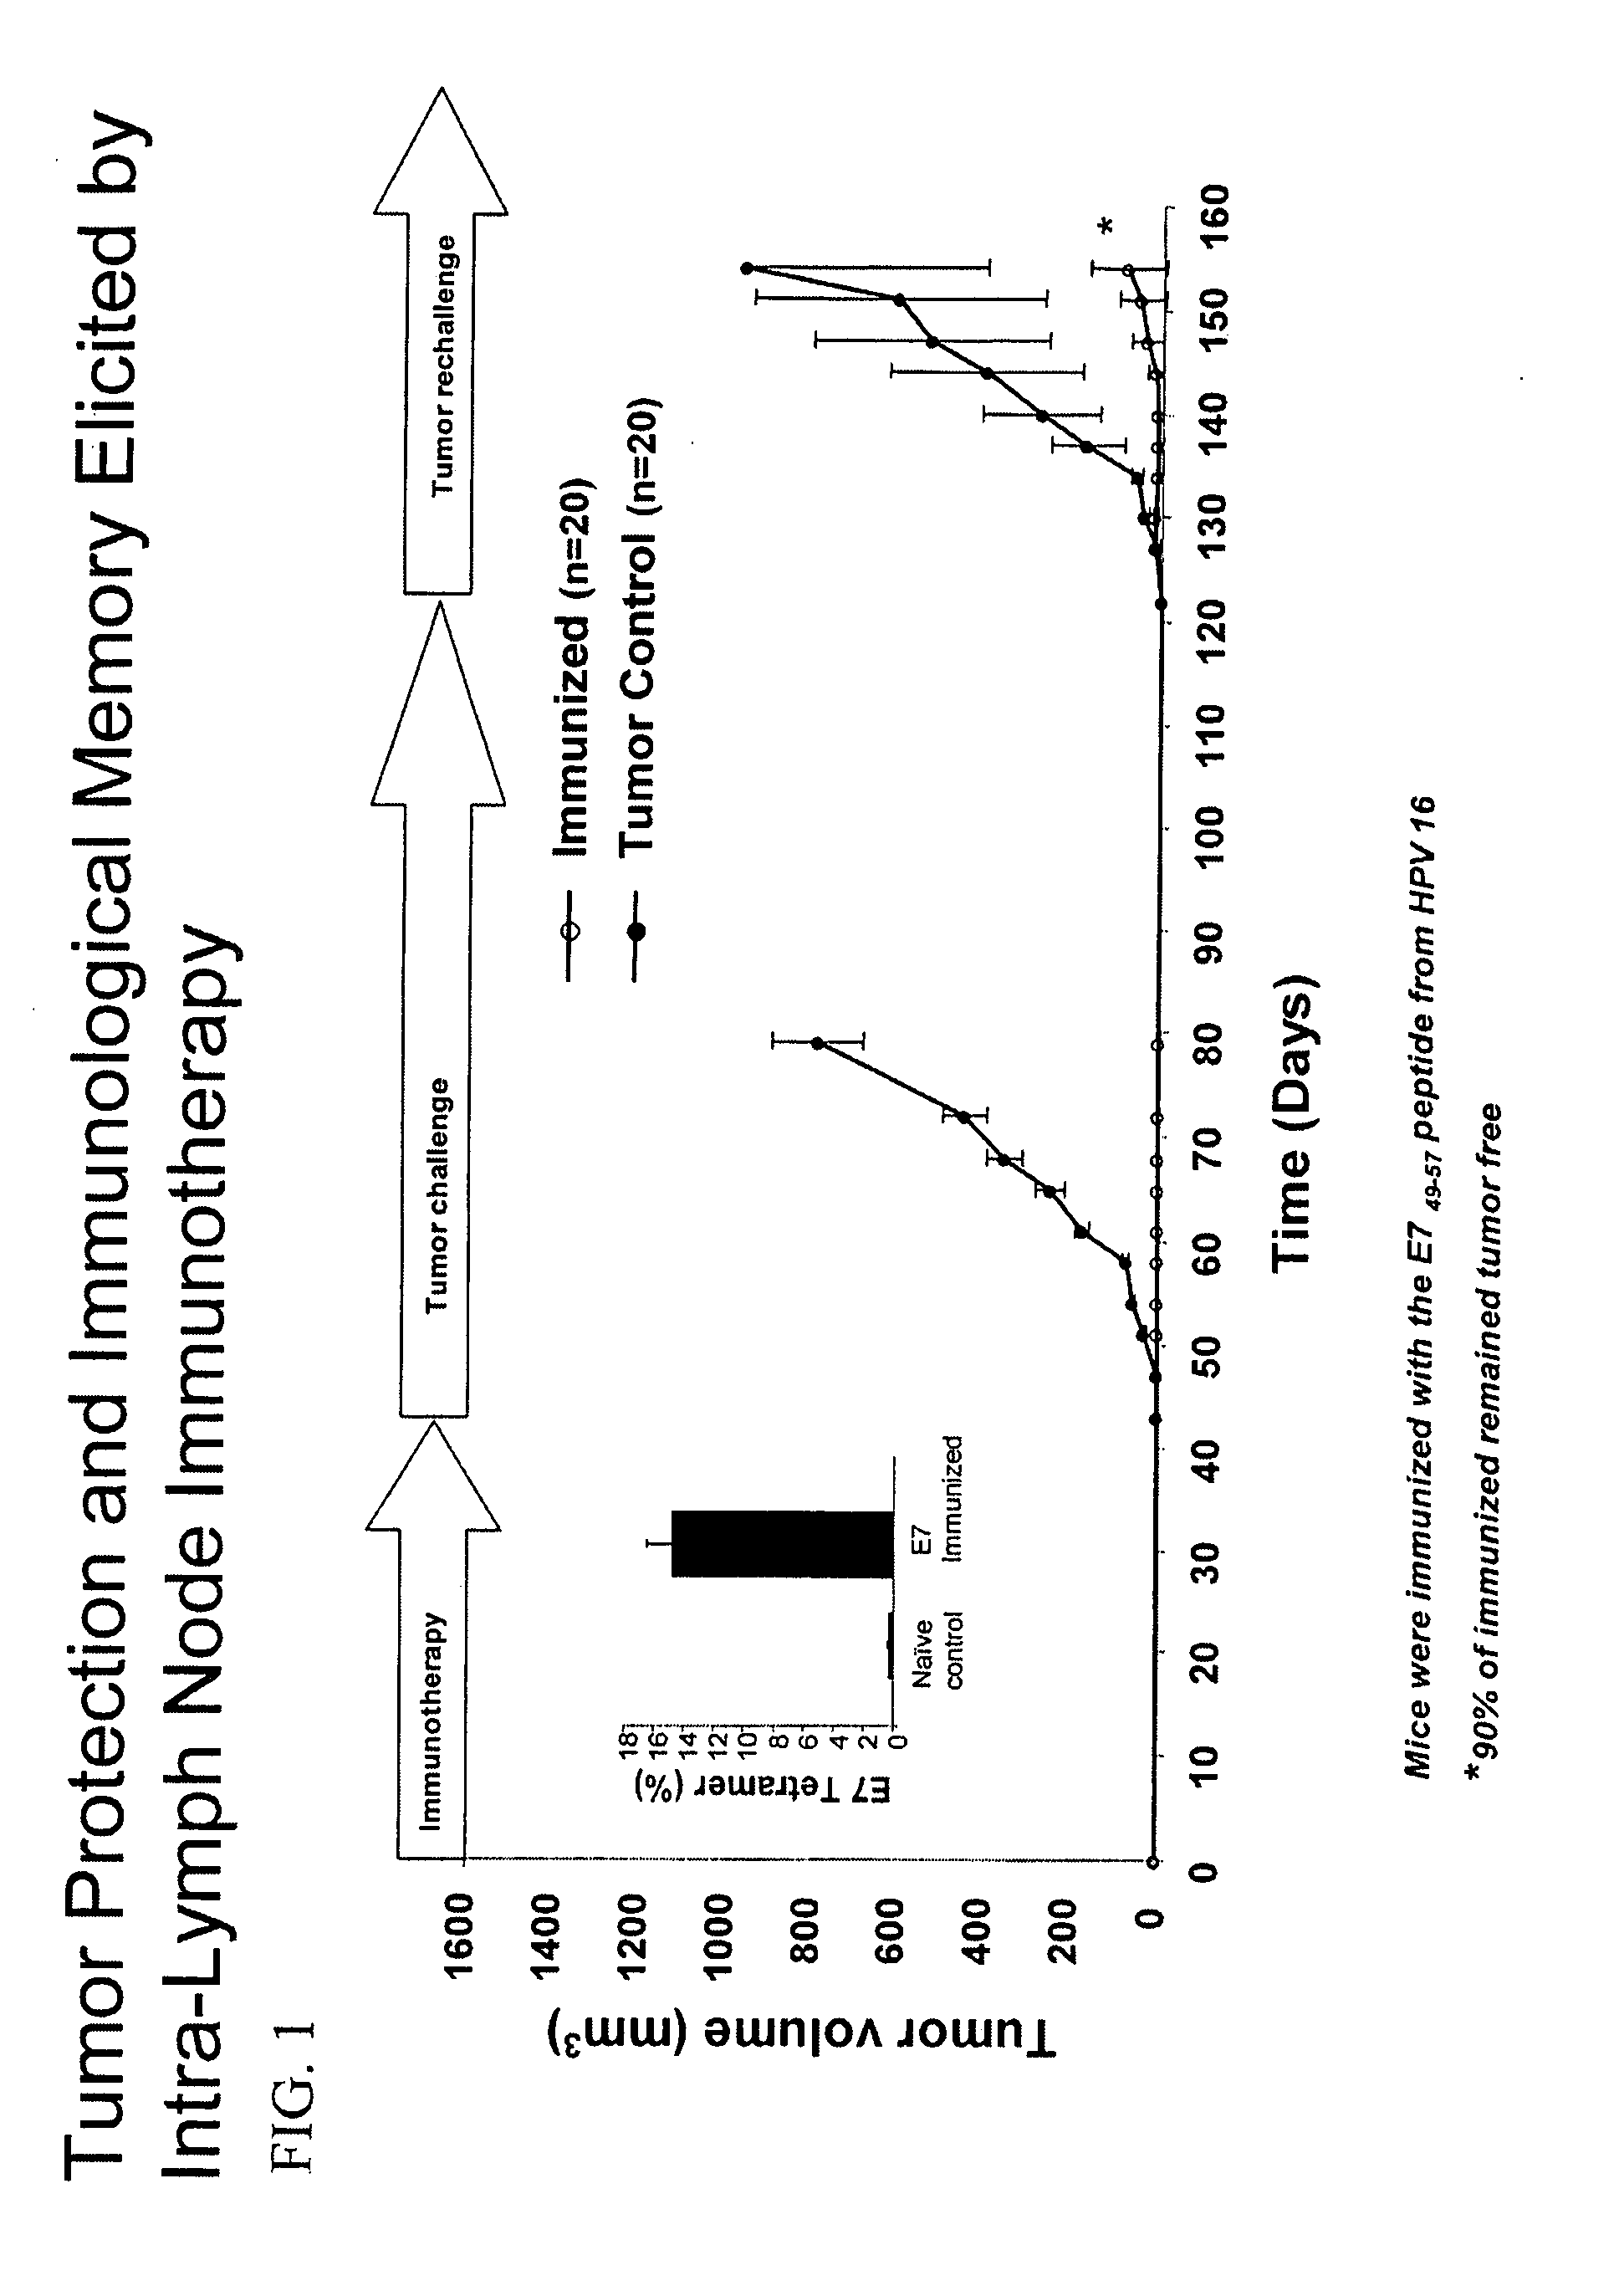 Methods to elicit, enhance and sustain immune responses against MHC class I-restricted epitopes, for prophylactic and therapeutic purposes